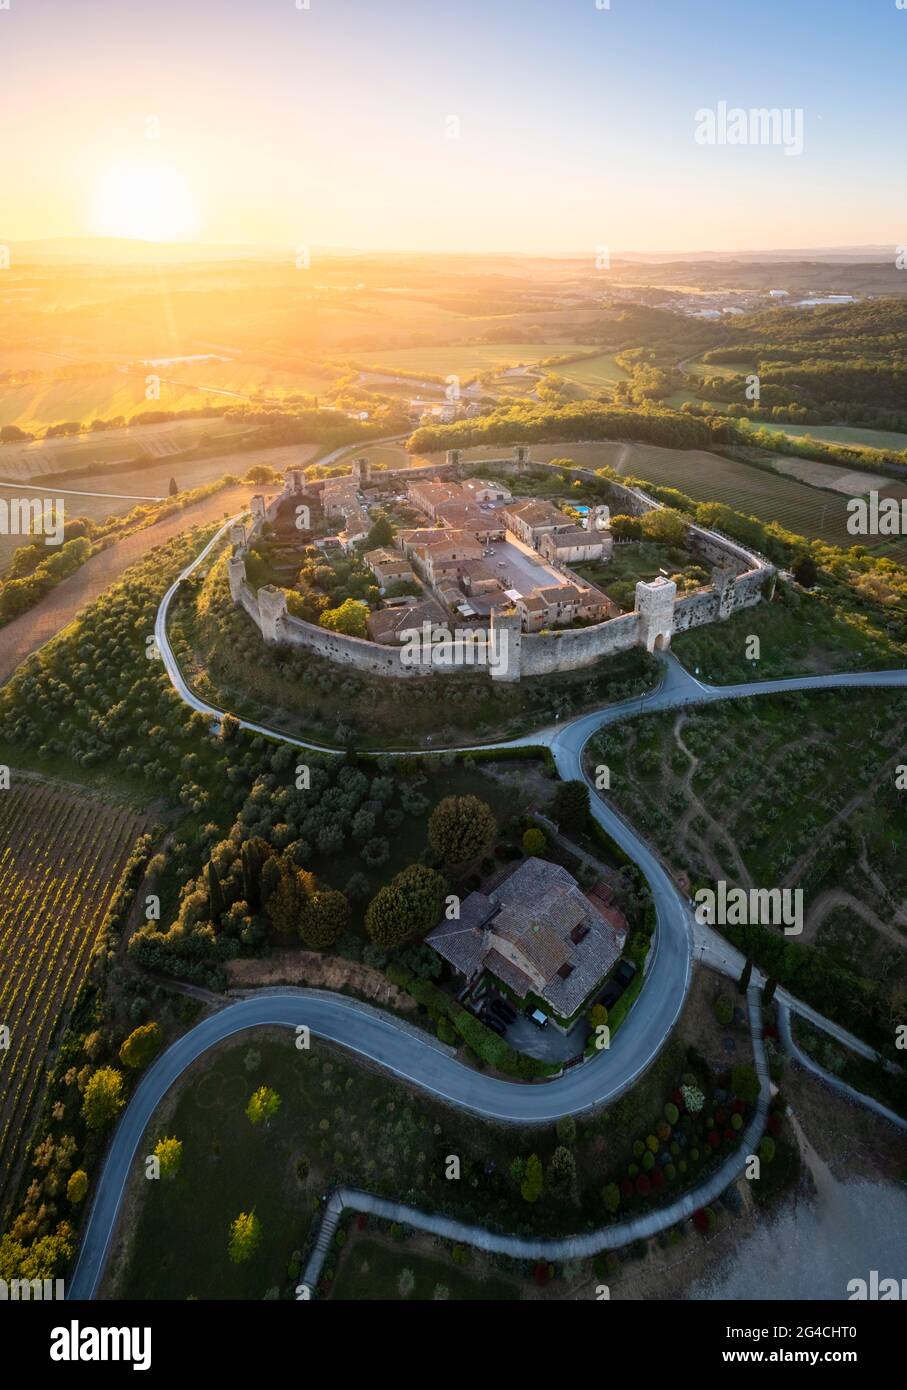 Aerial view of the medieval town of Monteriggioni at sunset. Monteriggioni, Siena district, Tuscany, Italy. Stock Photo